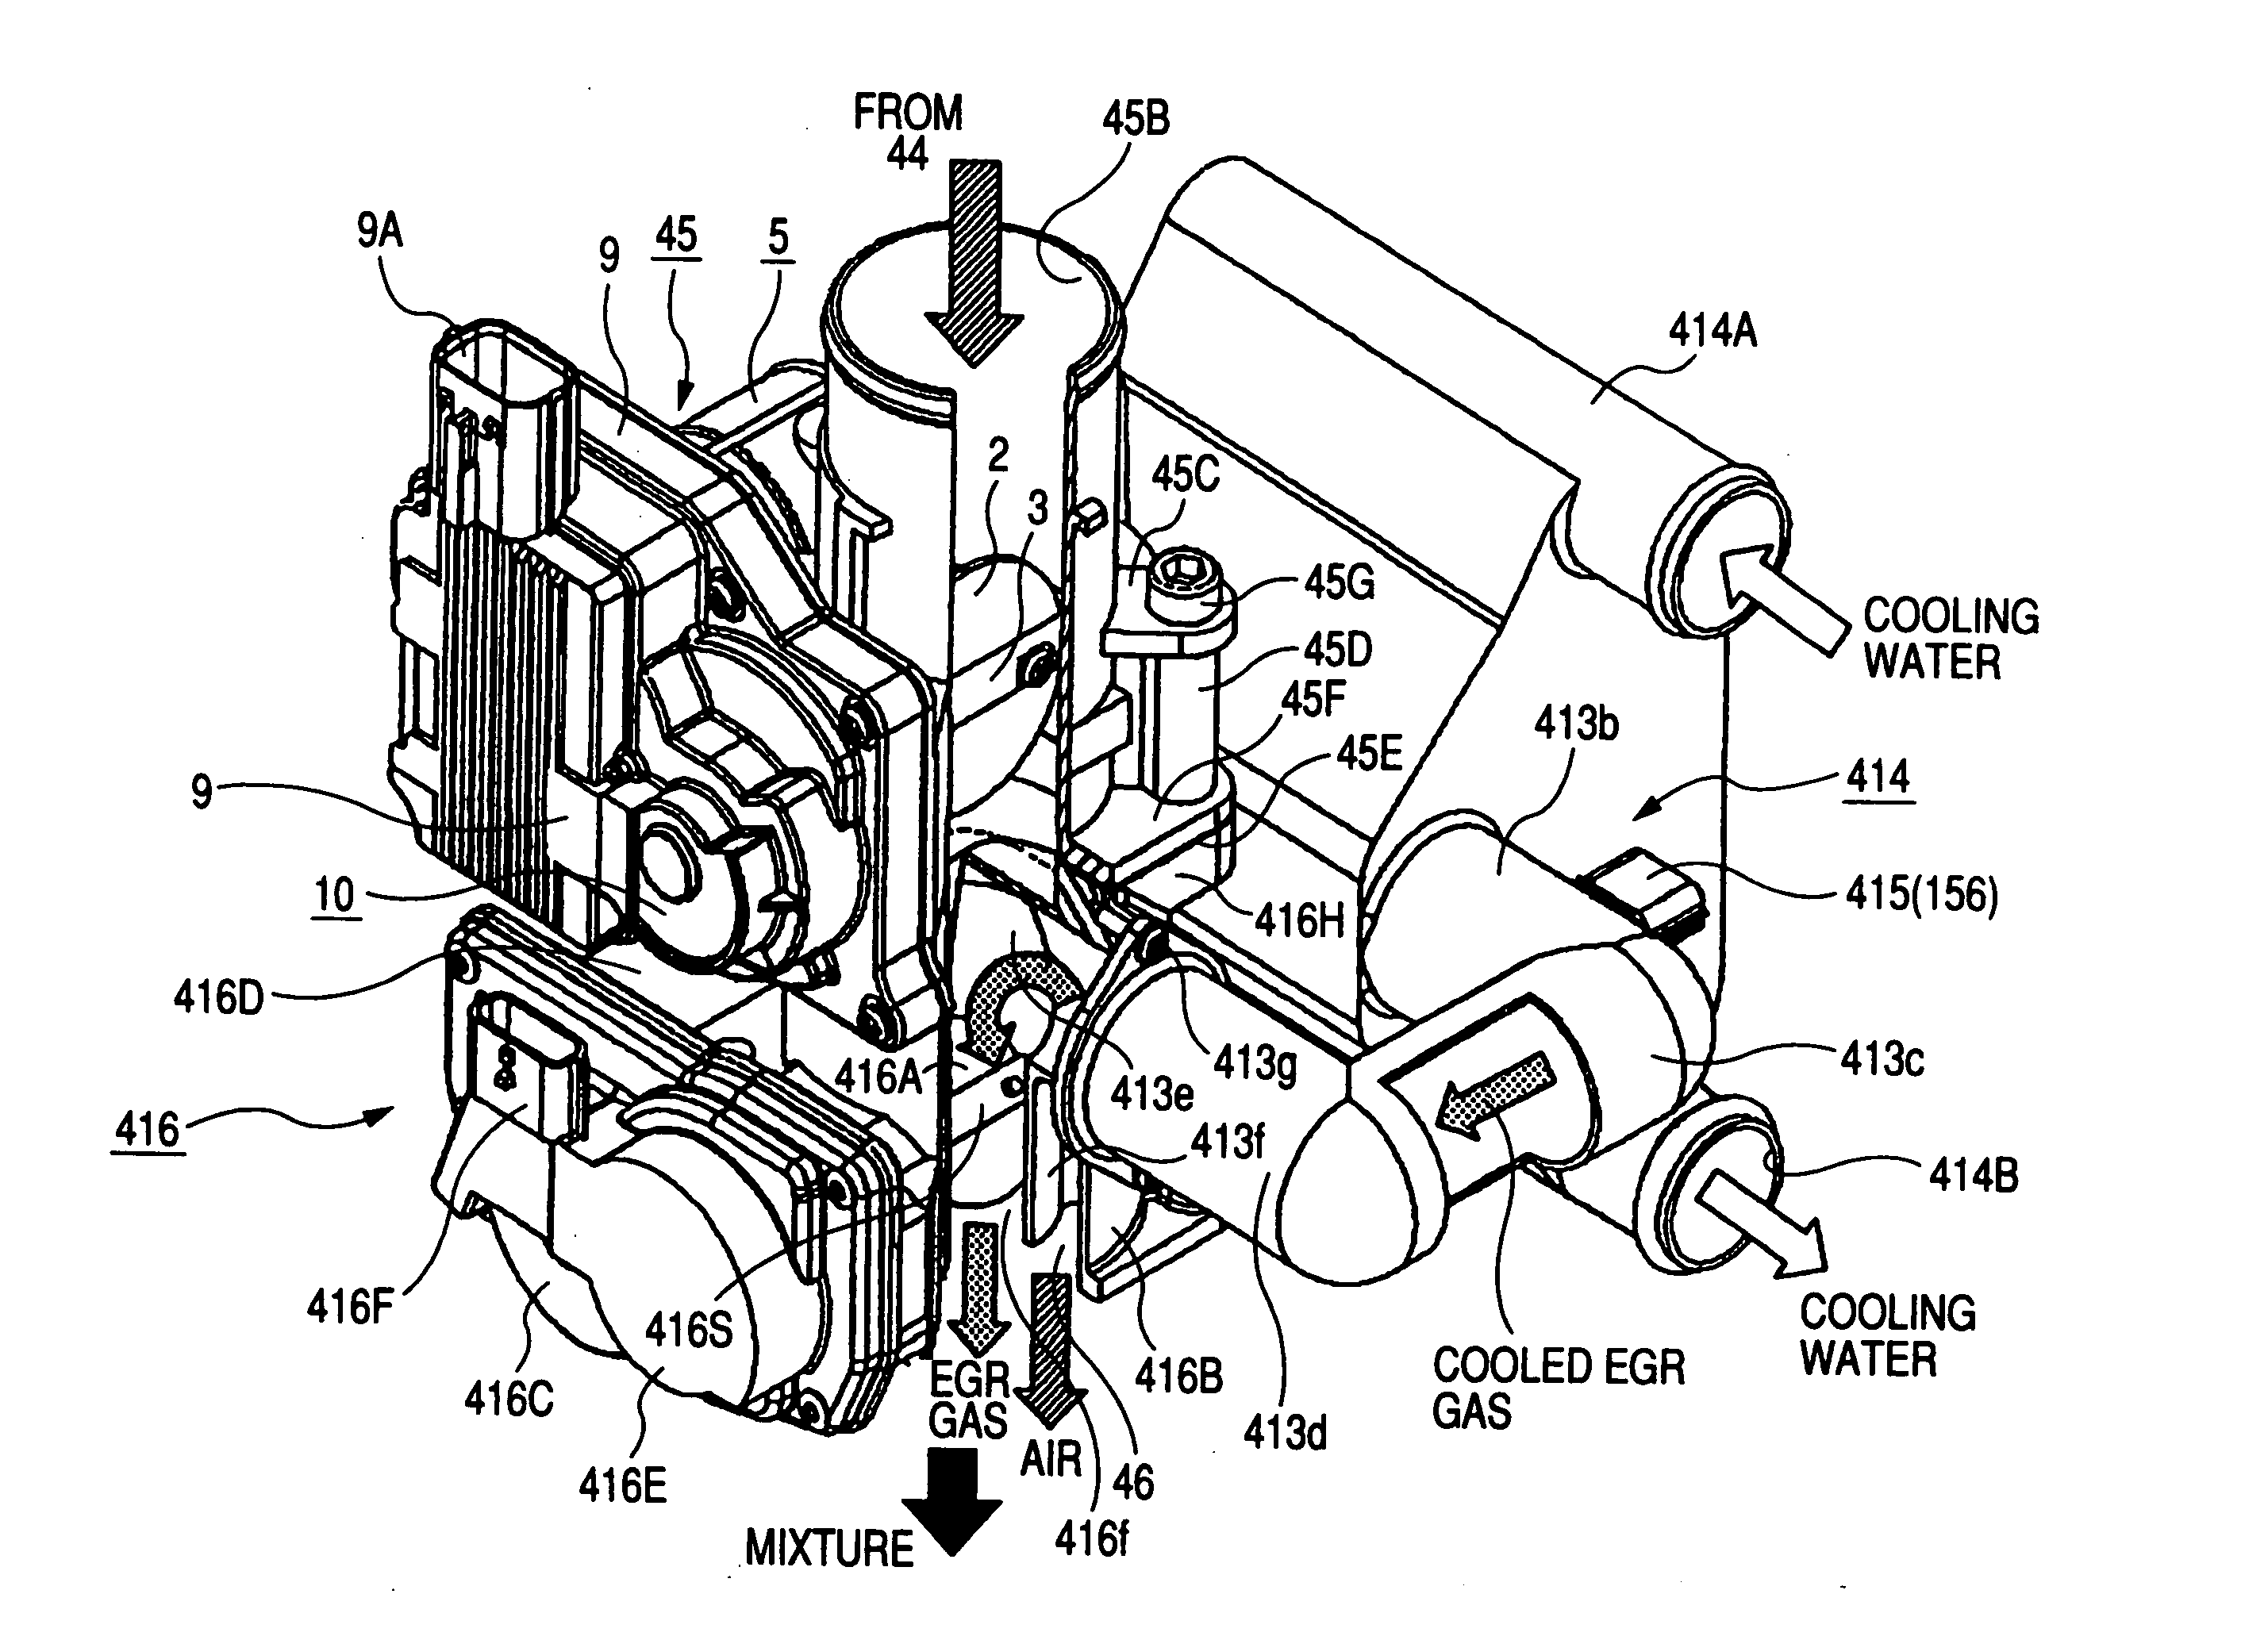 Electronic EGR gas control system